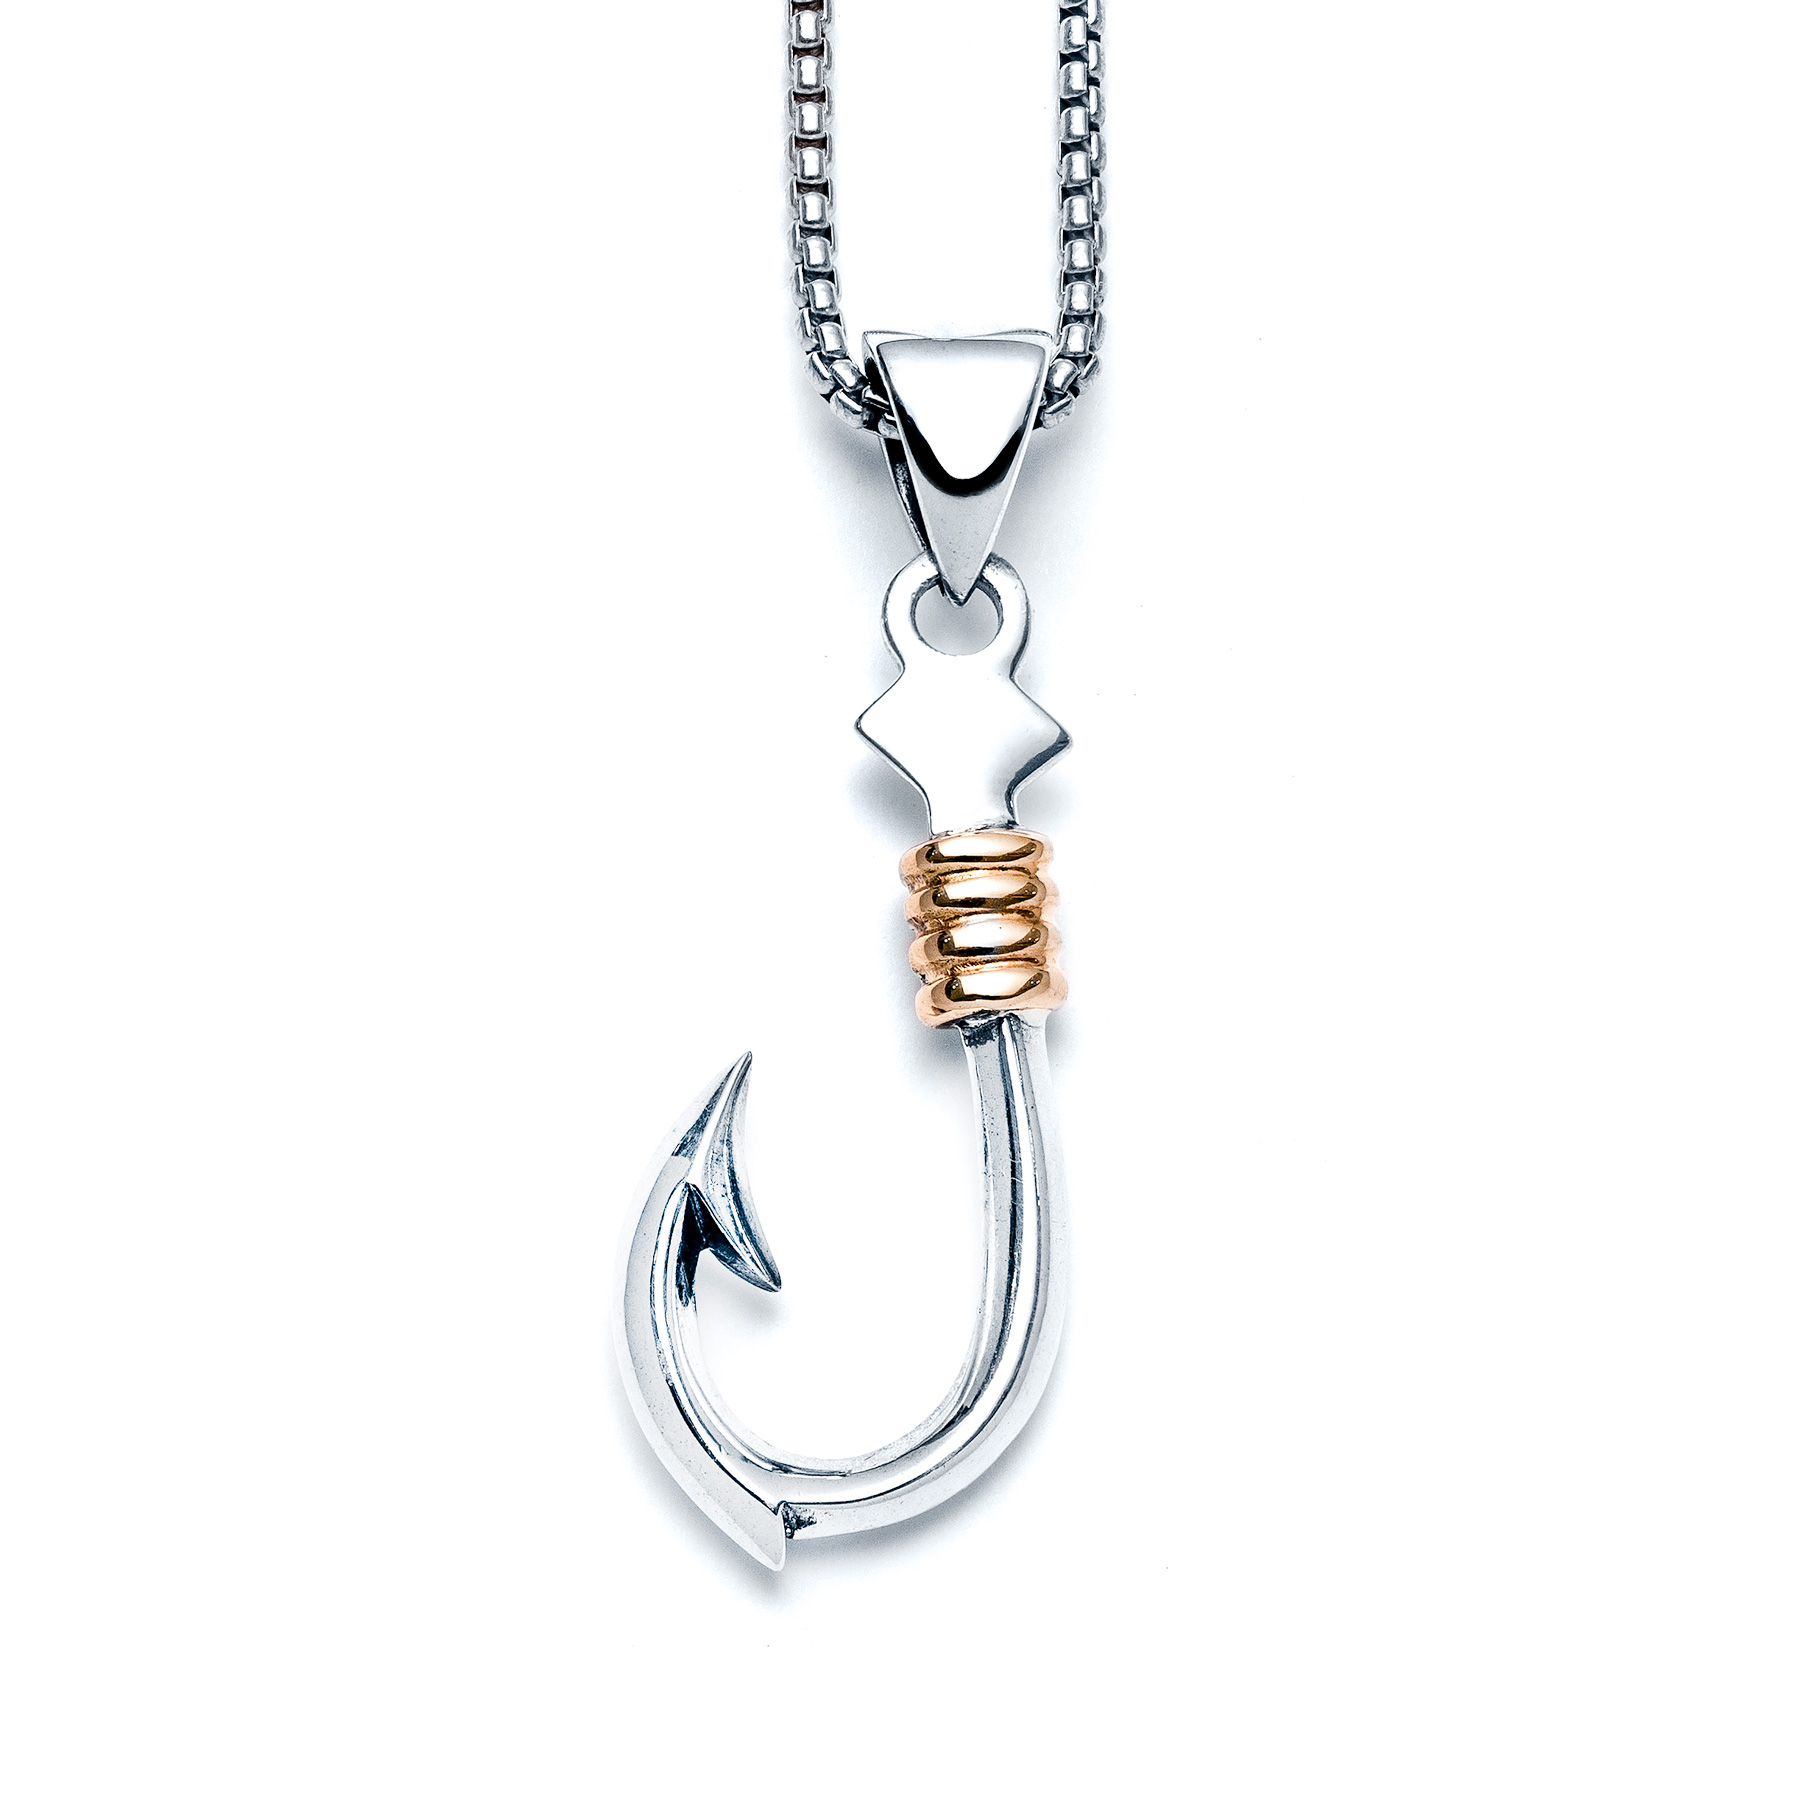 Two Tone Small Fish Hook Necklace in Sterling Silver With 14k Gold Detail